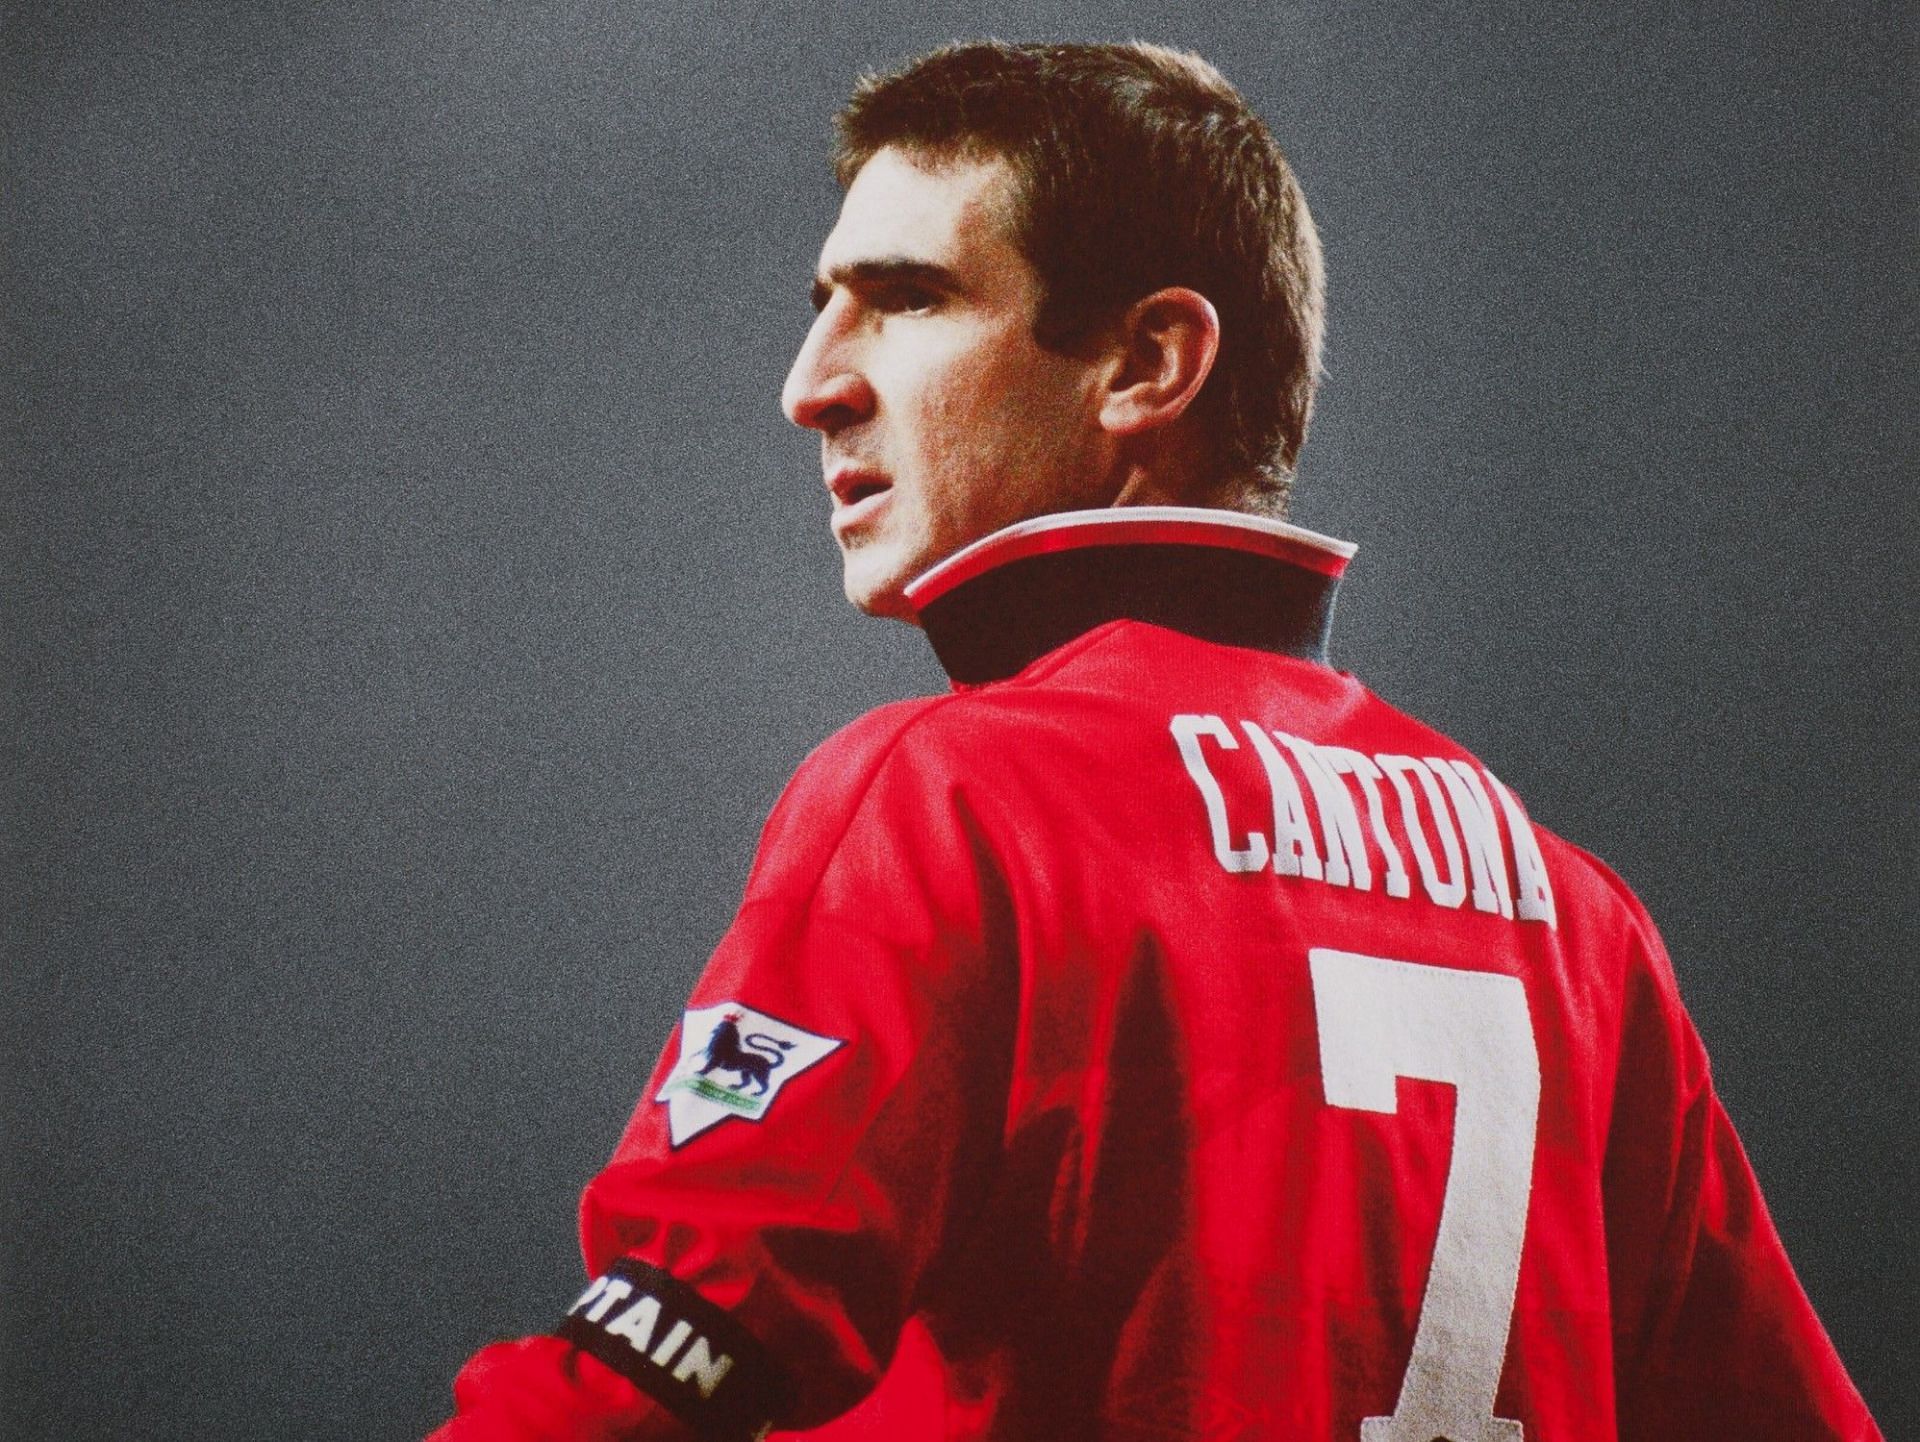 Cantona played the game with his heart on his sleeve.